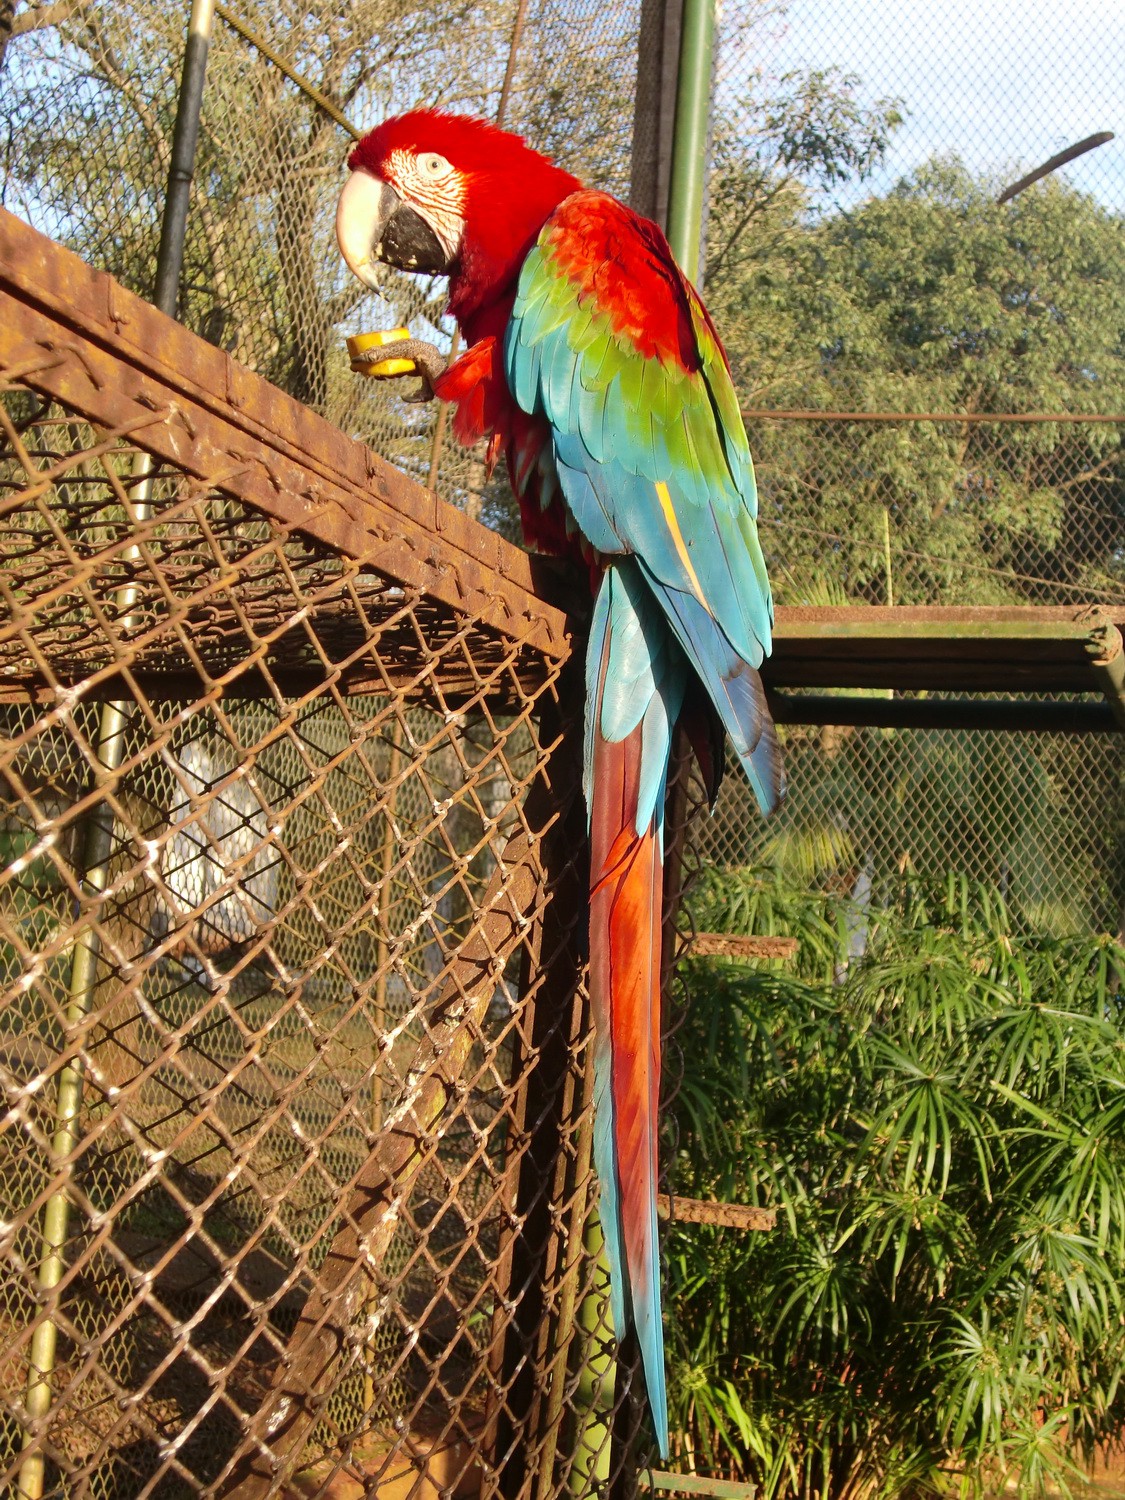 Papagayo Rojo (Red Parrot) in the Itaibu Zoo